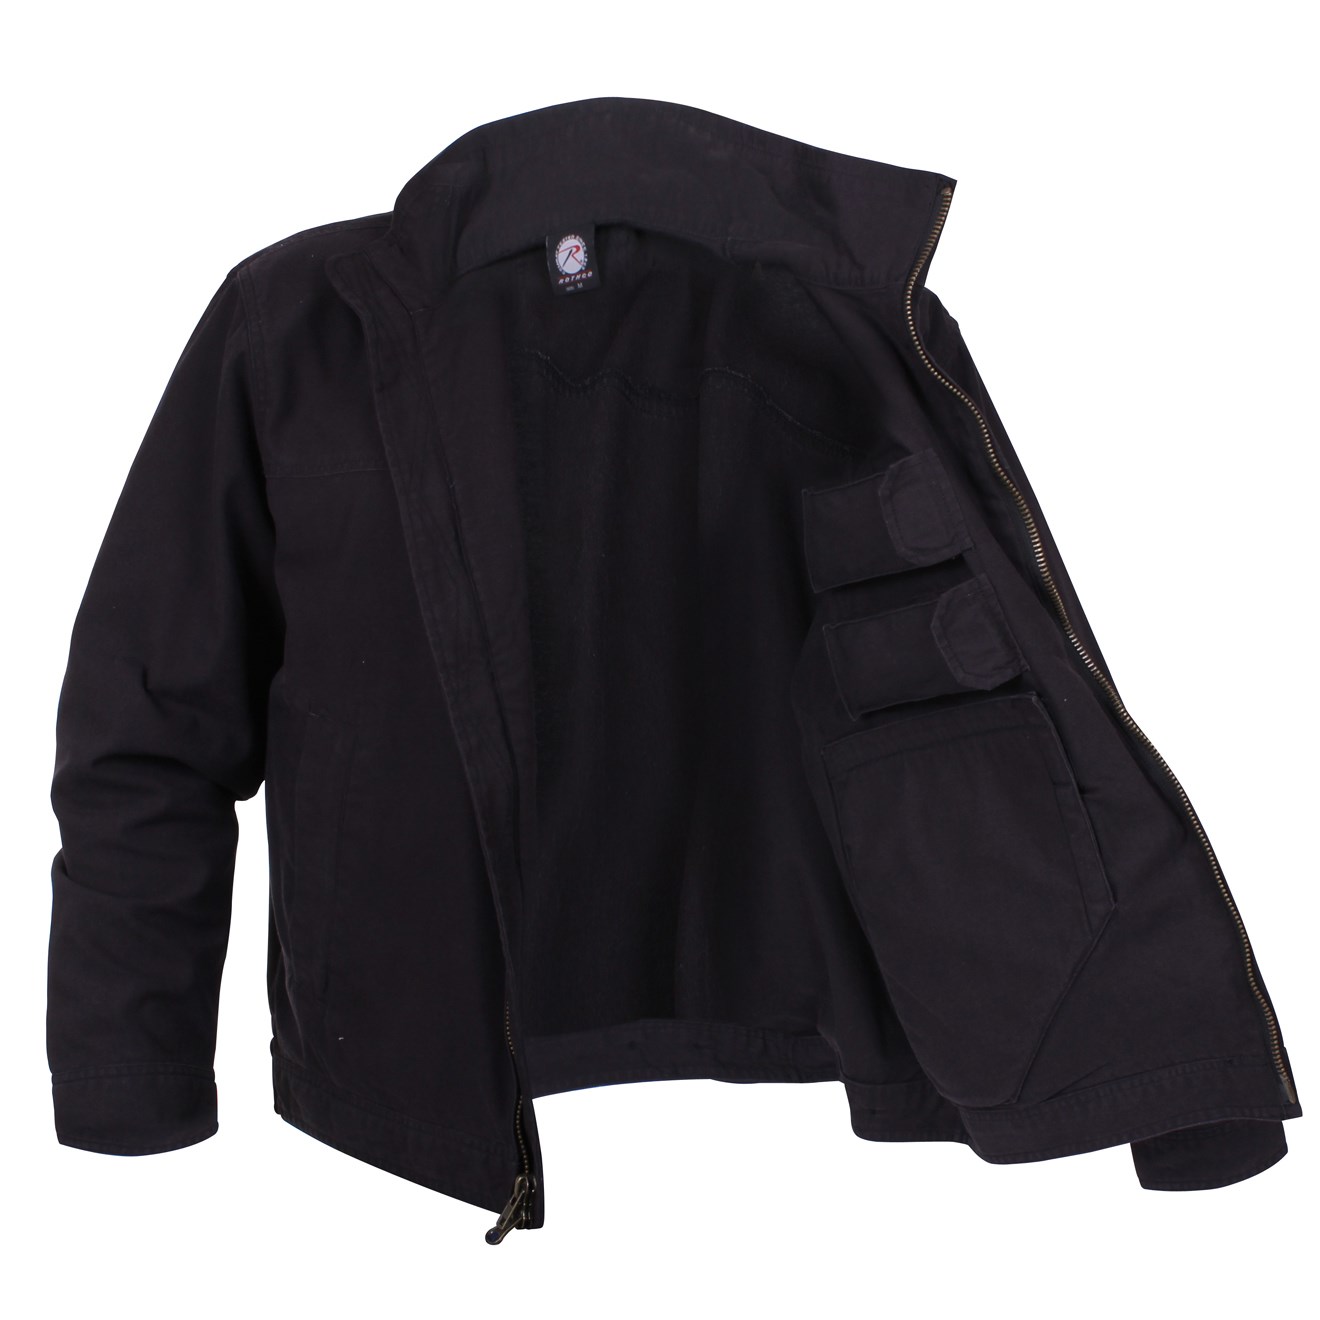 Jacke CONCEALED CARRY light SCHWARZ ROTHCO 59585 L-11